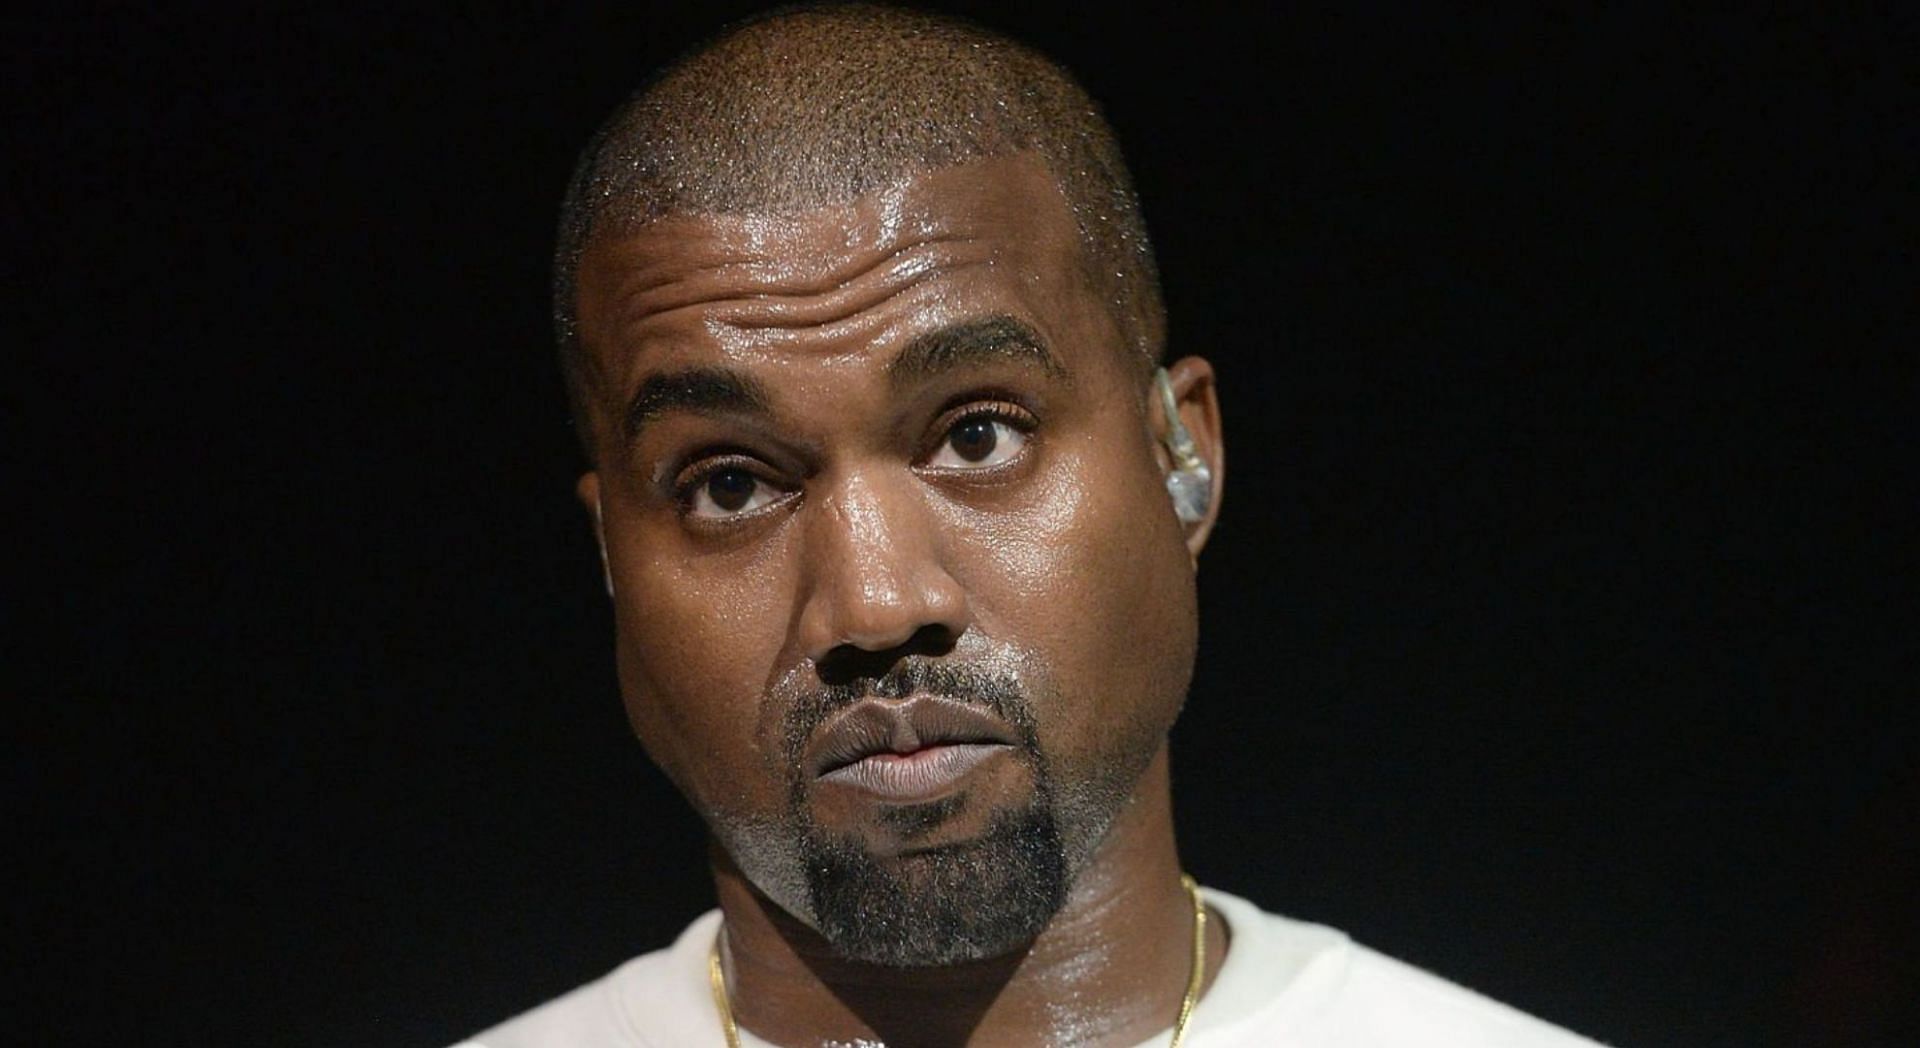 Kanye West claims about Kim Kardashian sparked major speculation online (Image via Getty Images)